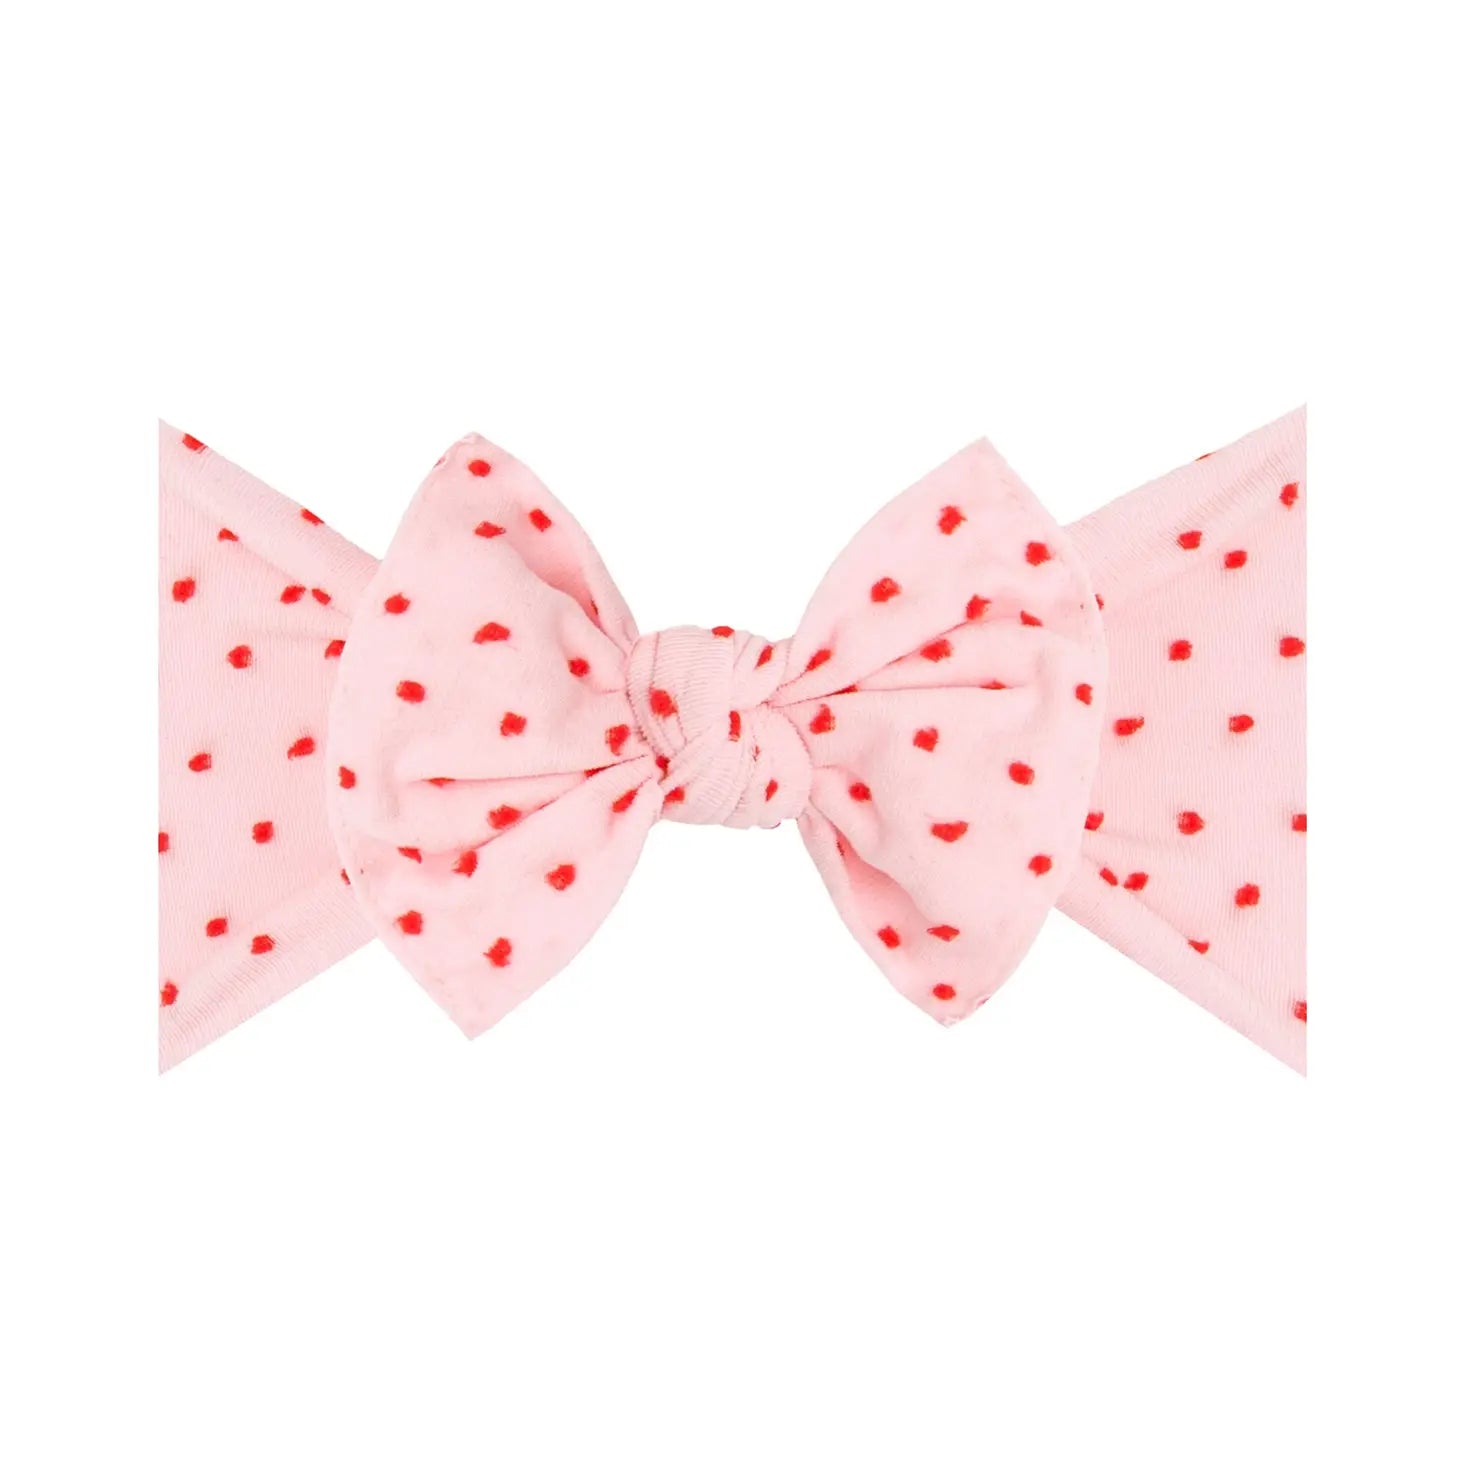 Patterned Shabby Knot: Pink / Red Dot